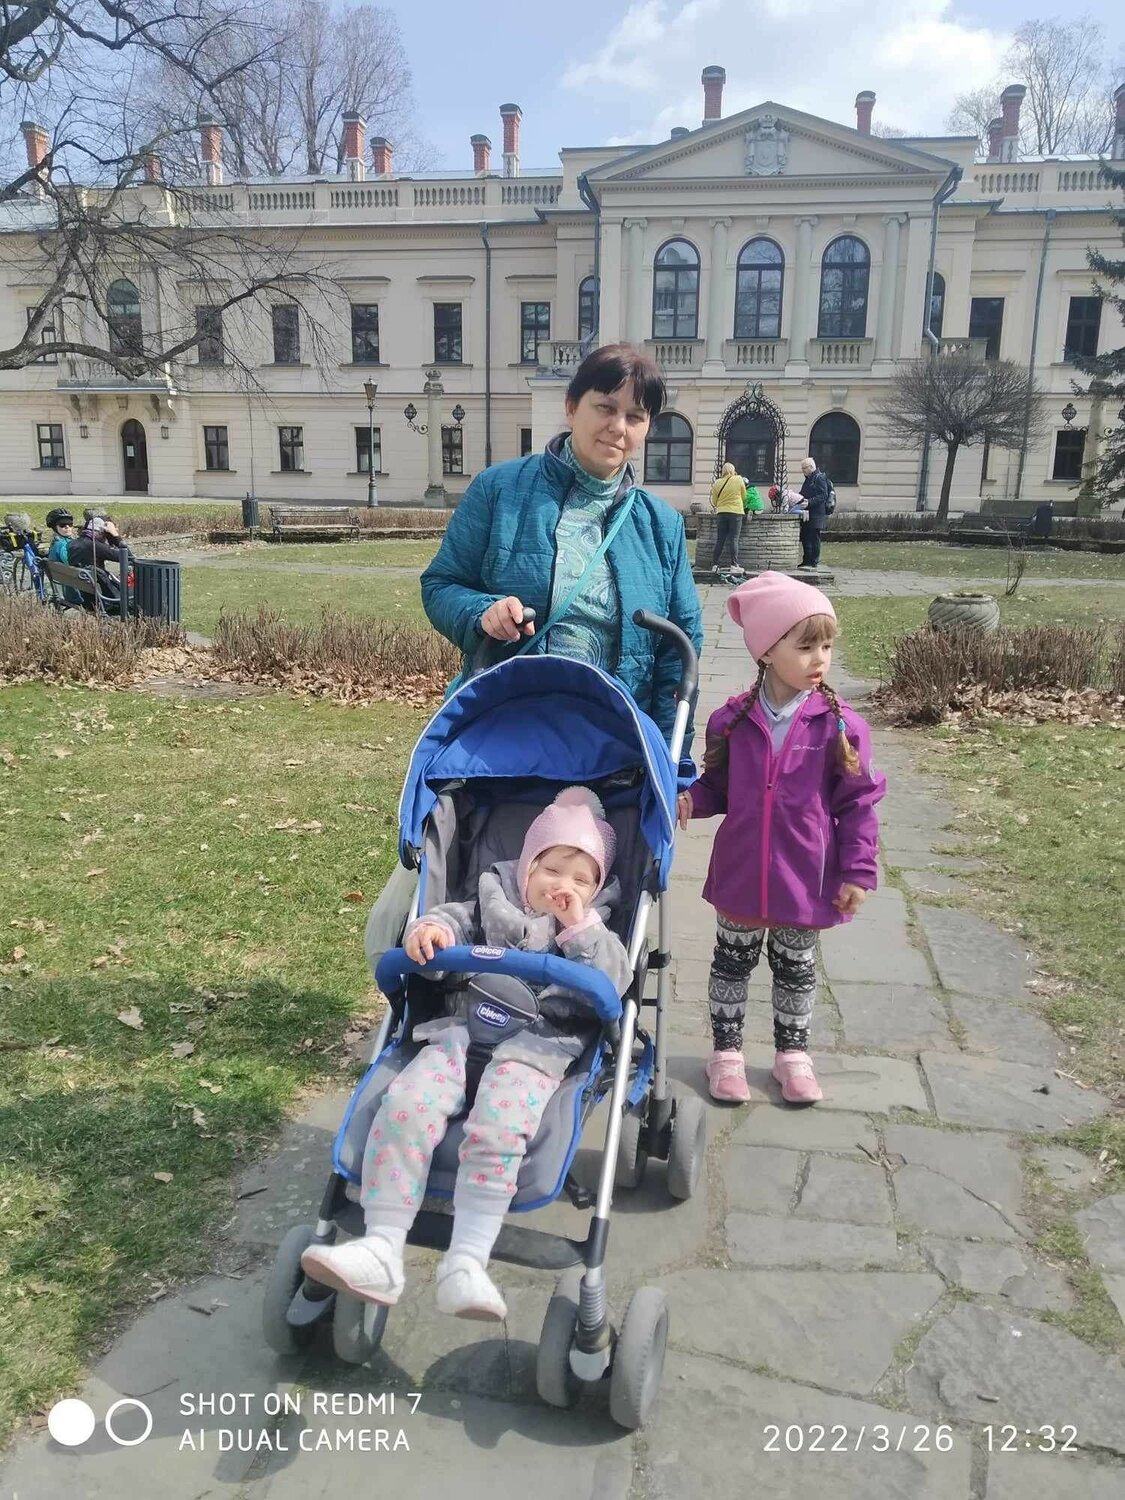 Valentyna Benson spent several weeks in Poland with her daughter, Katja, and two granddaughters after fleeing Ukraine. The men in their family stayed behind to defend their country against the Russians.